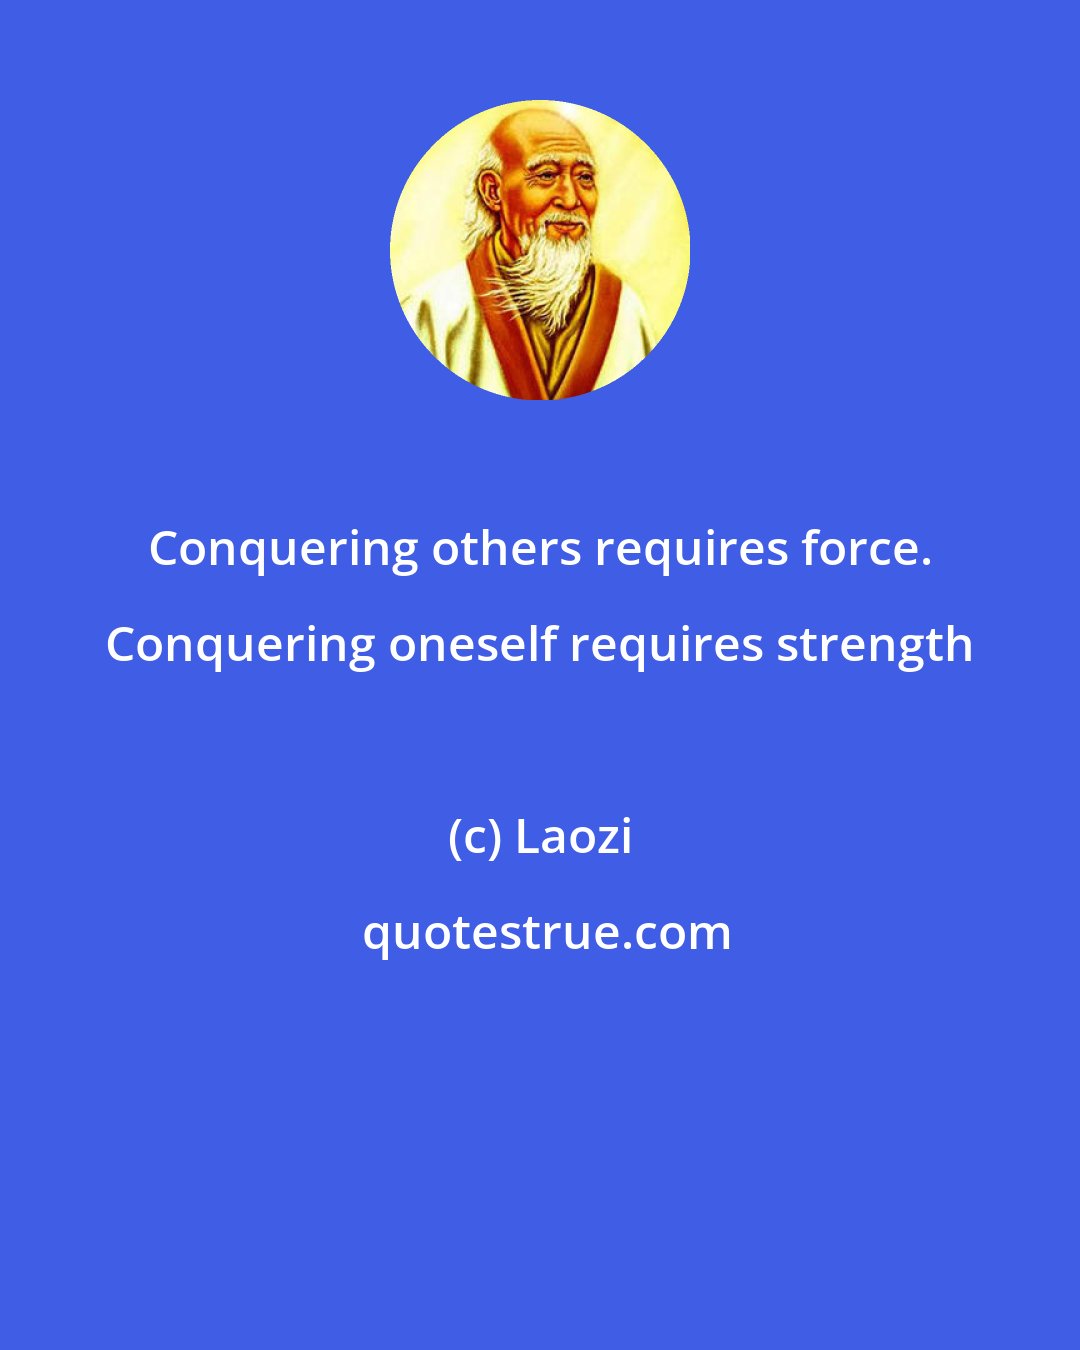 Laozi: Conquering others requires force. Conquering oneself requires strength